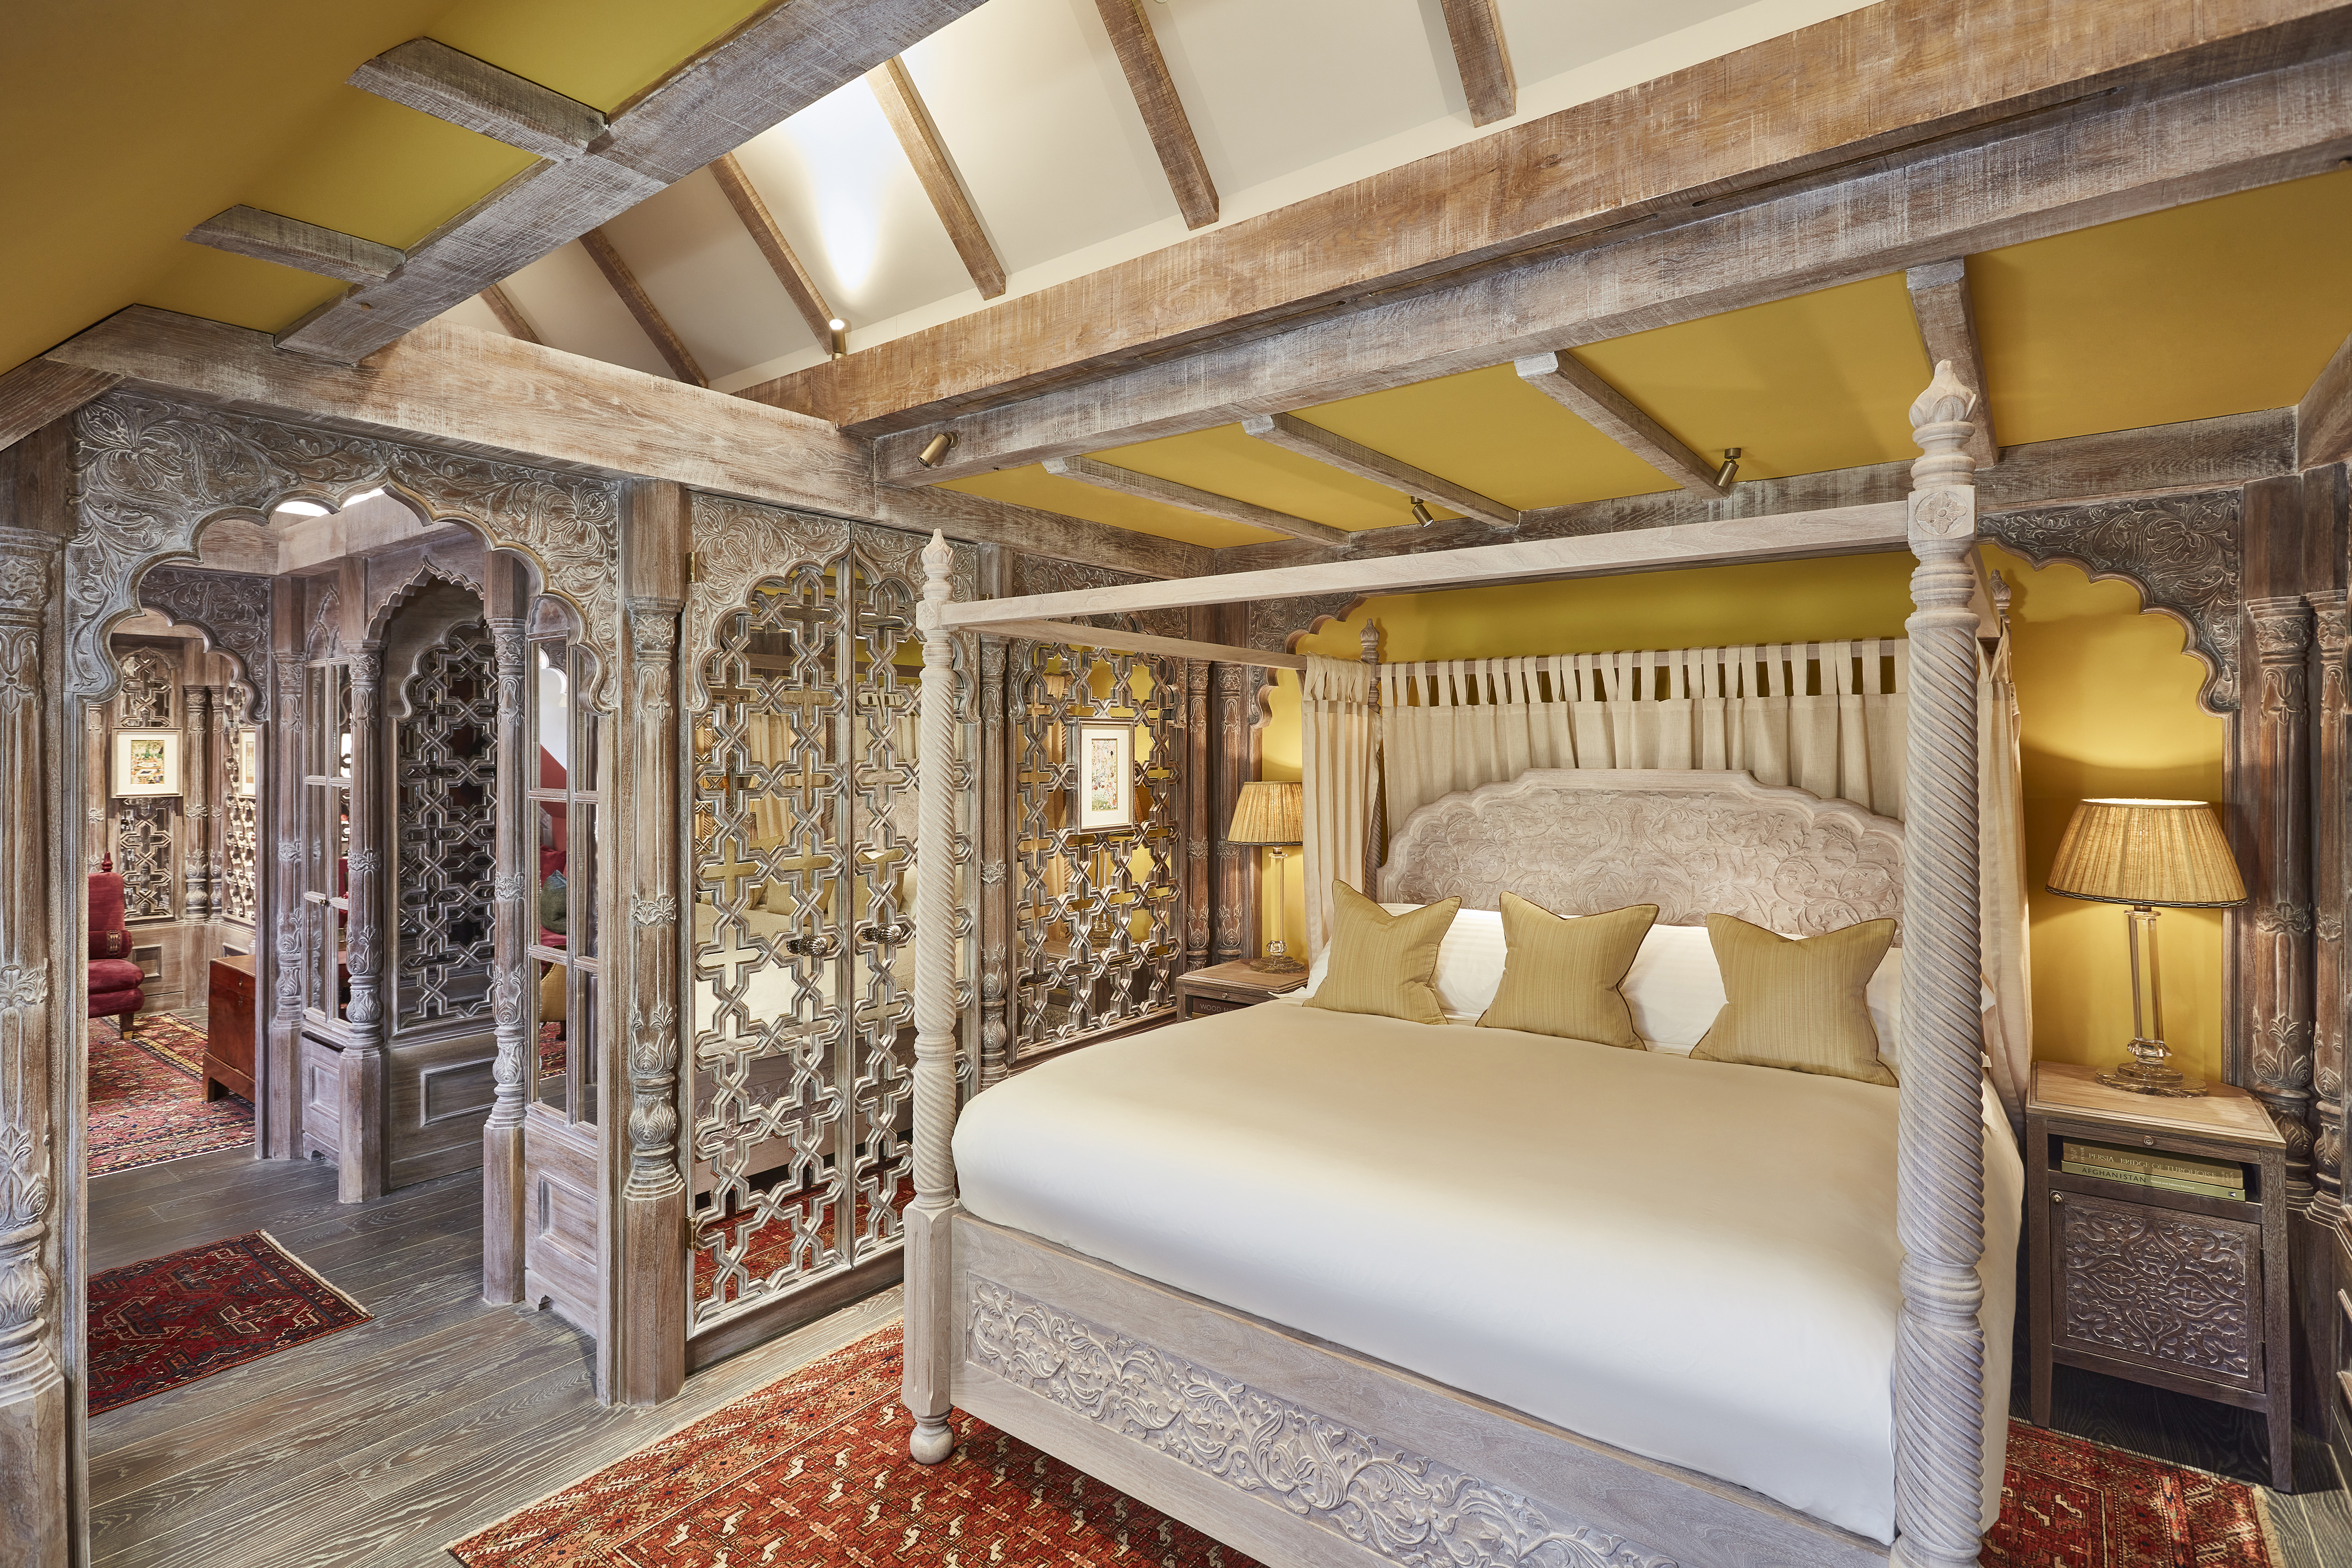 The suite comes with a carved four-poster bed